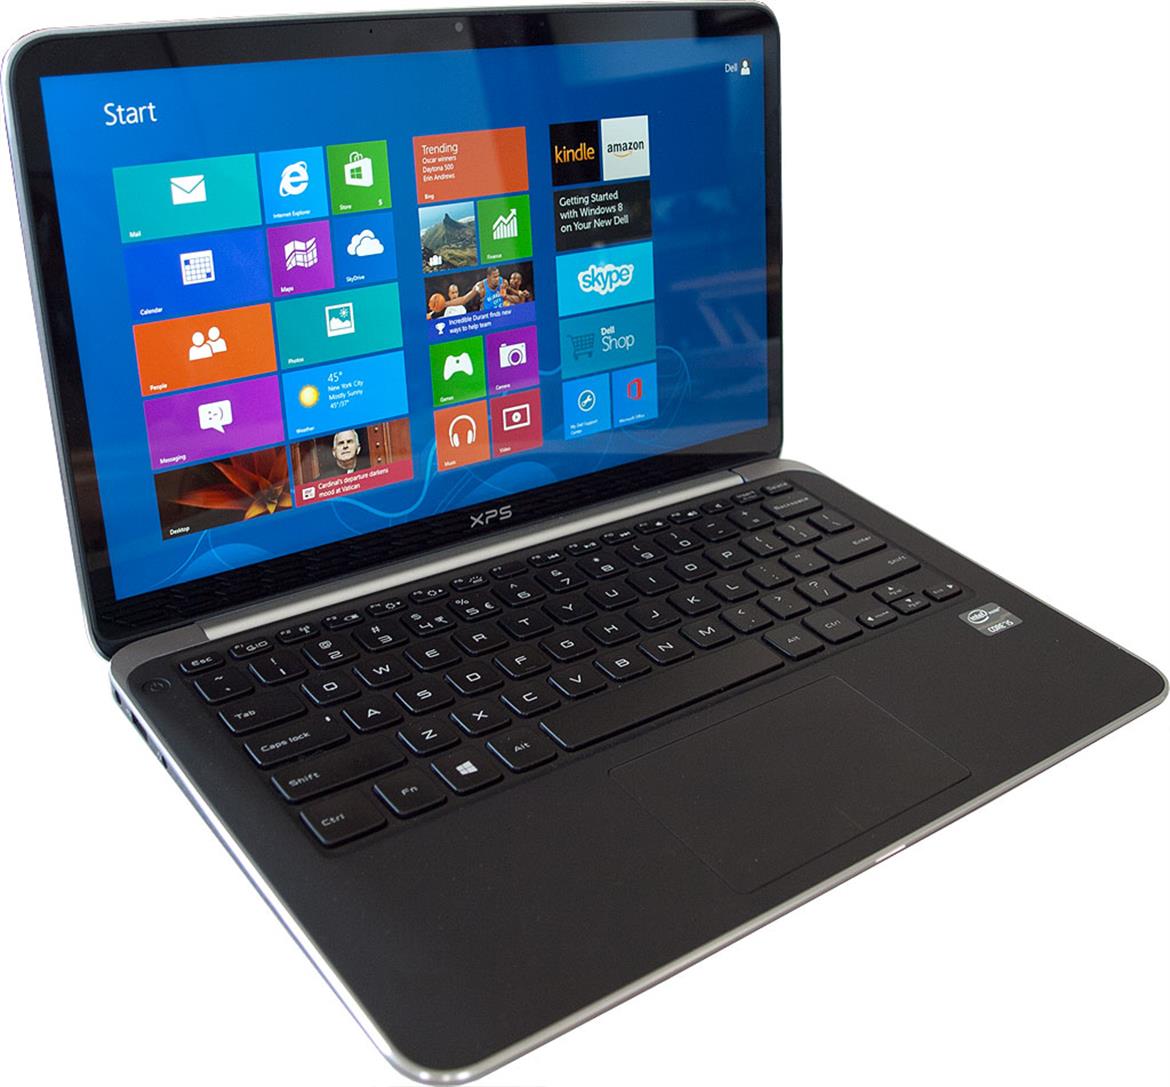 Revisiting Dell's XPS 13 Ultrabook, In Full HD